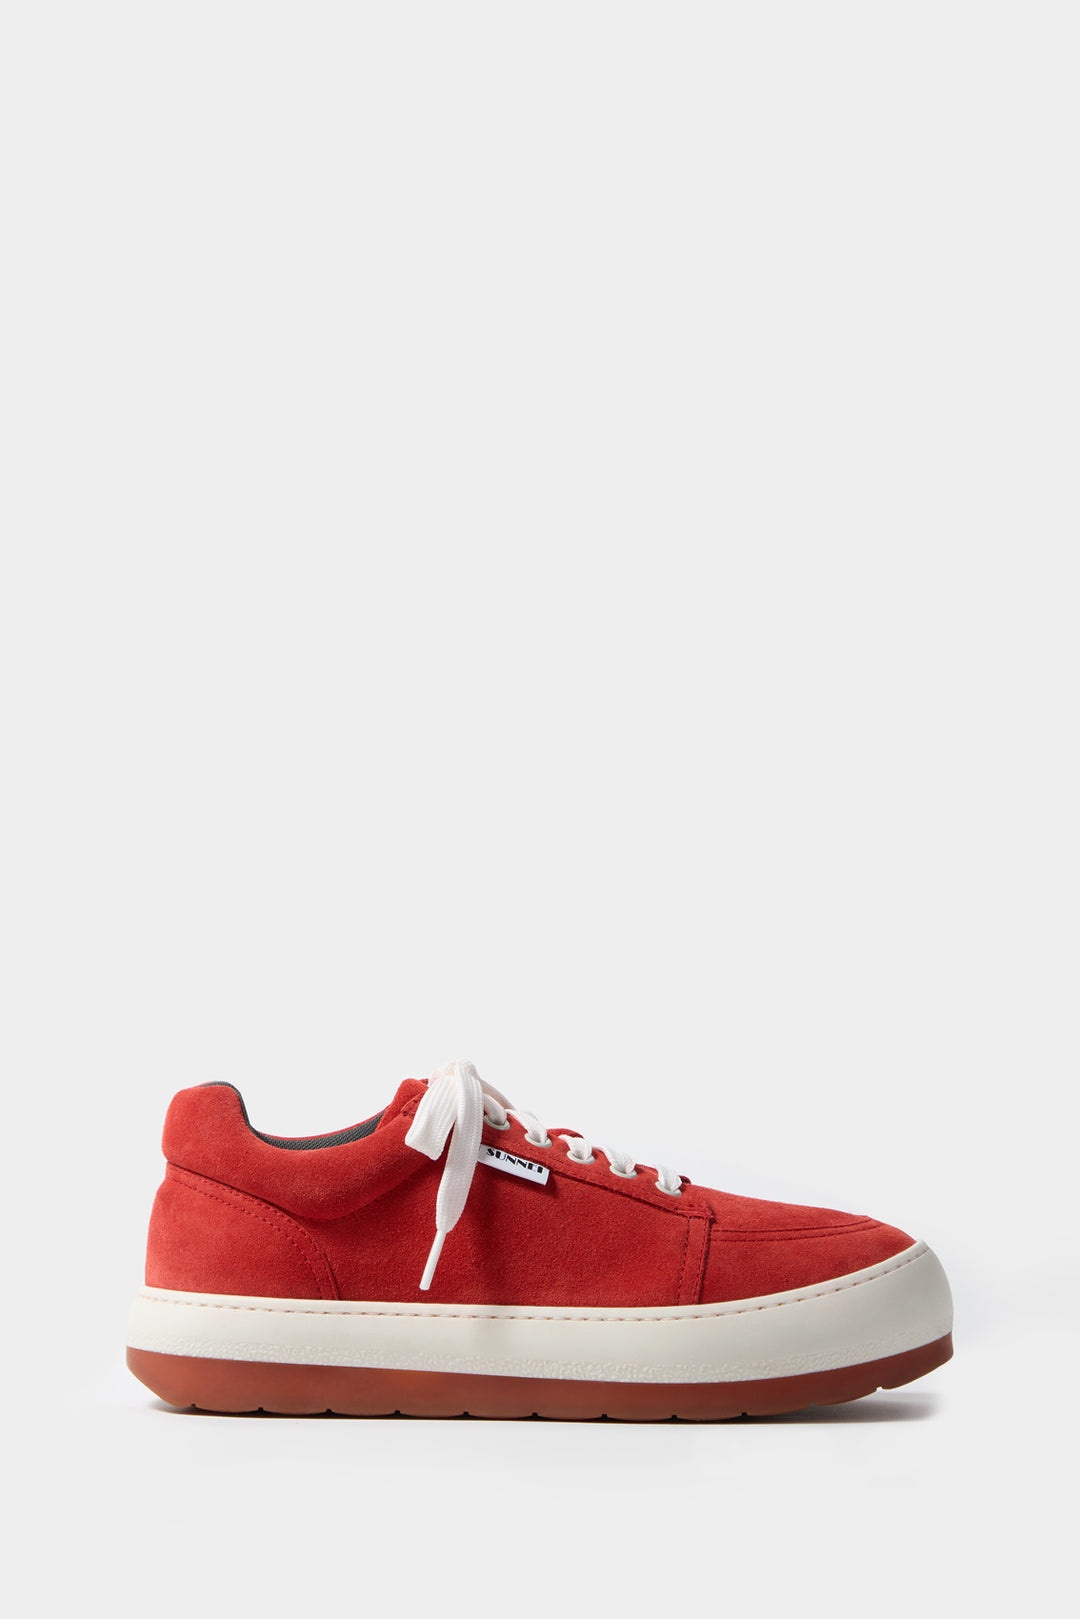 DREAMY SHOES / suede / red - 1